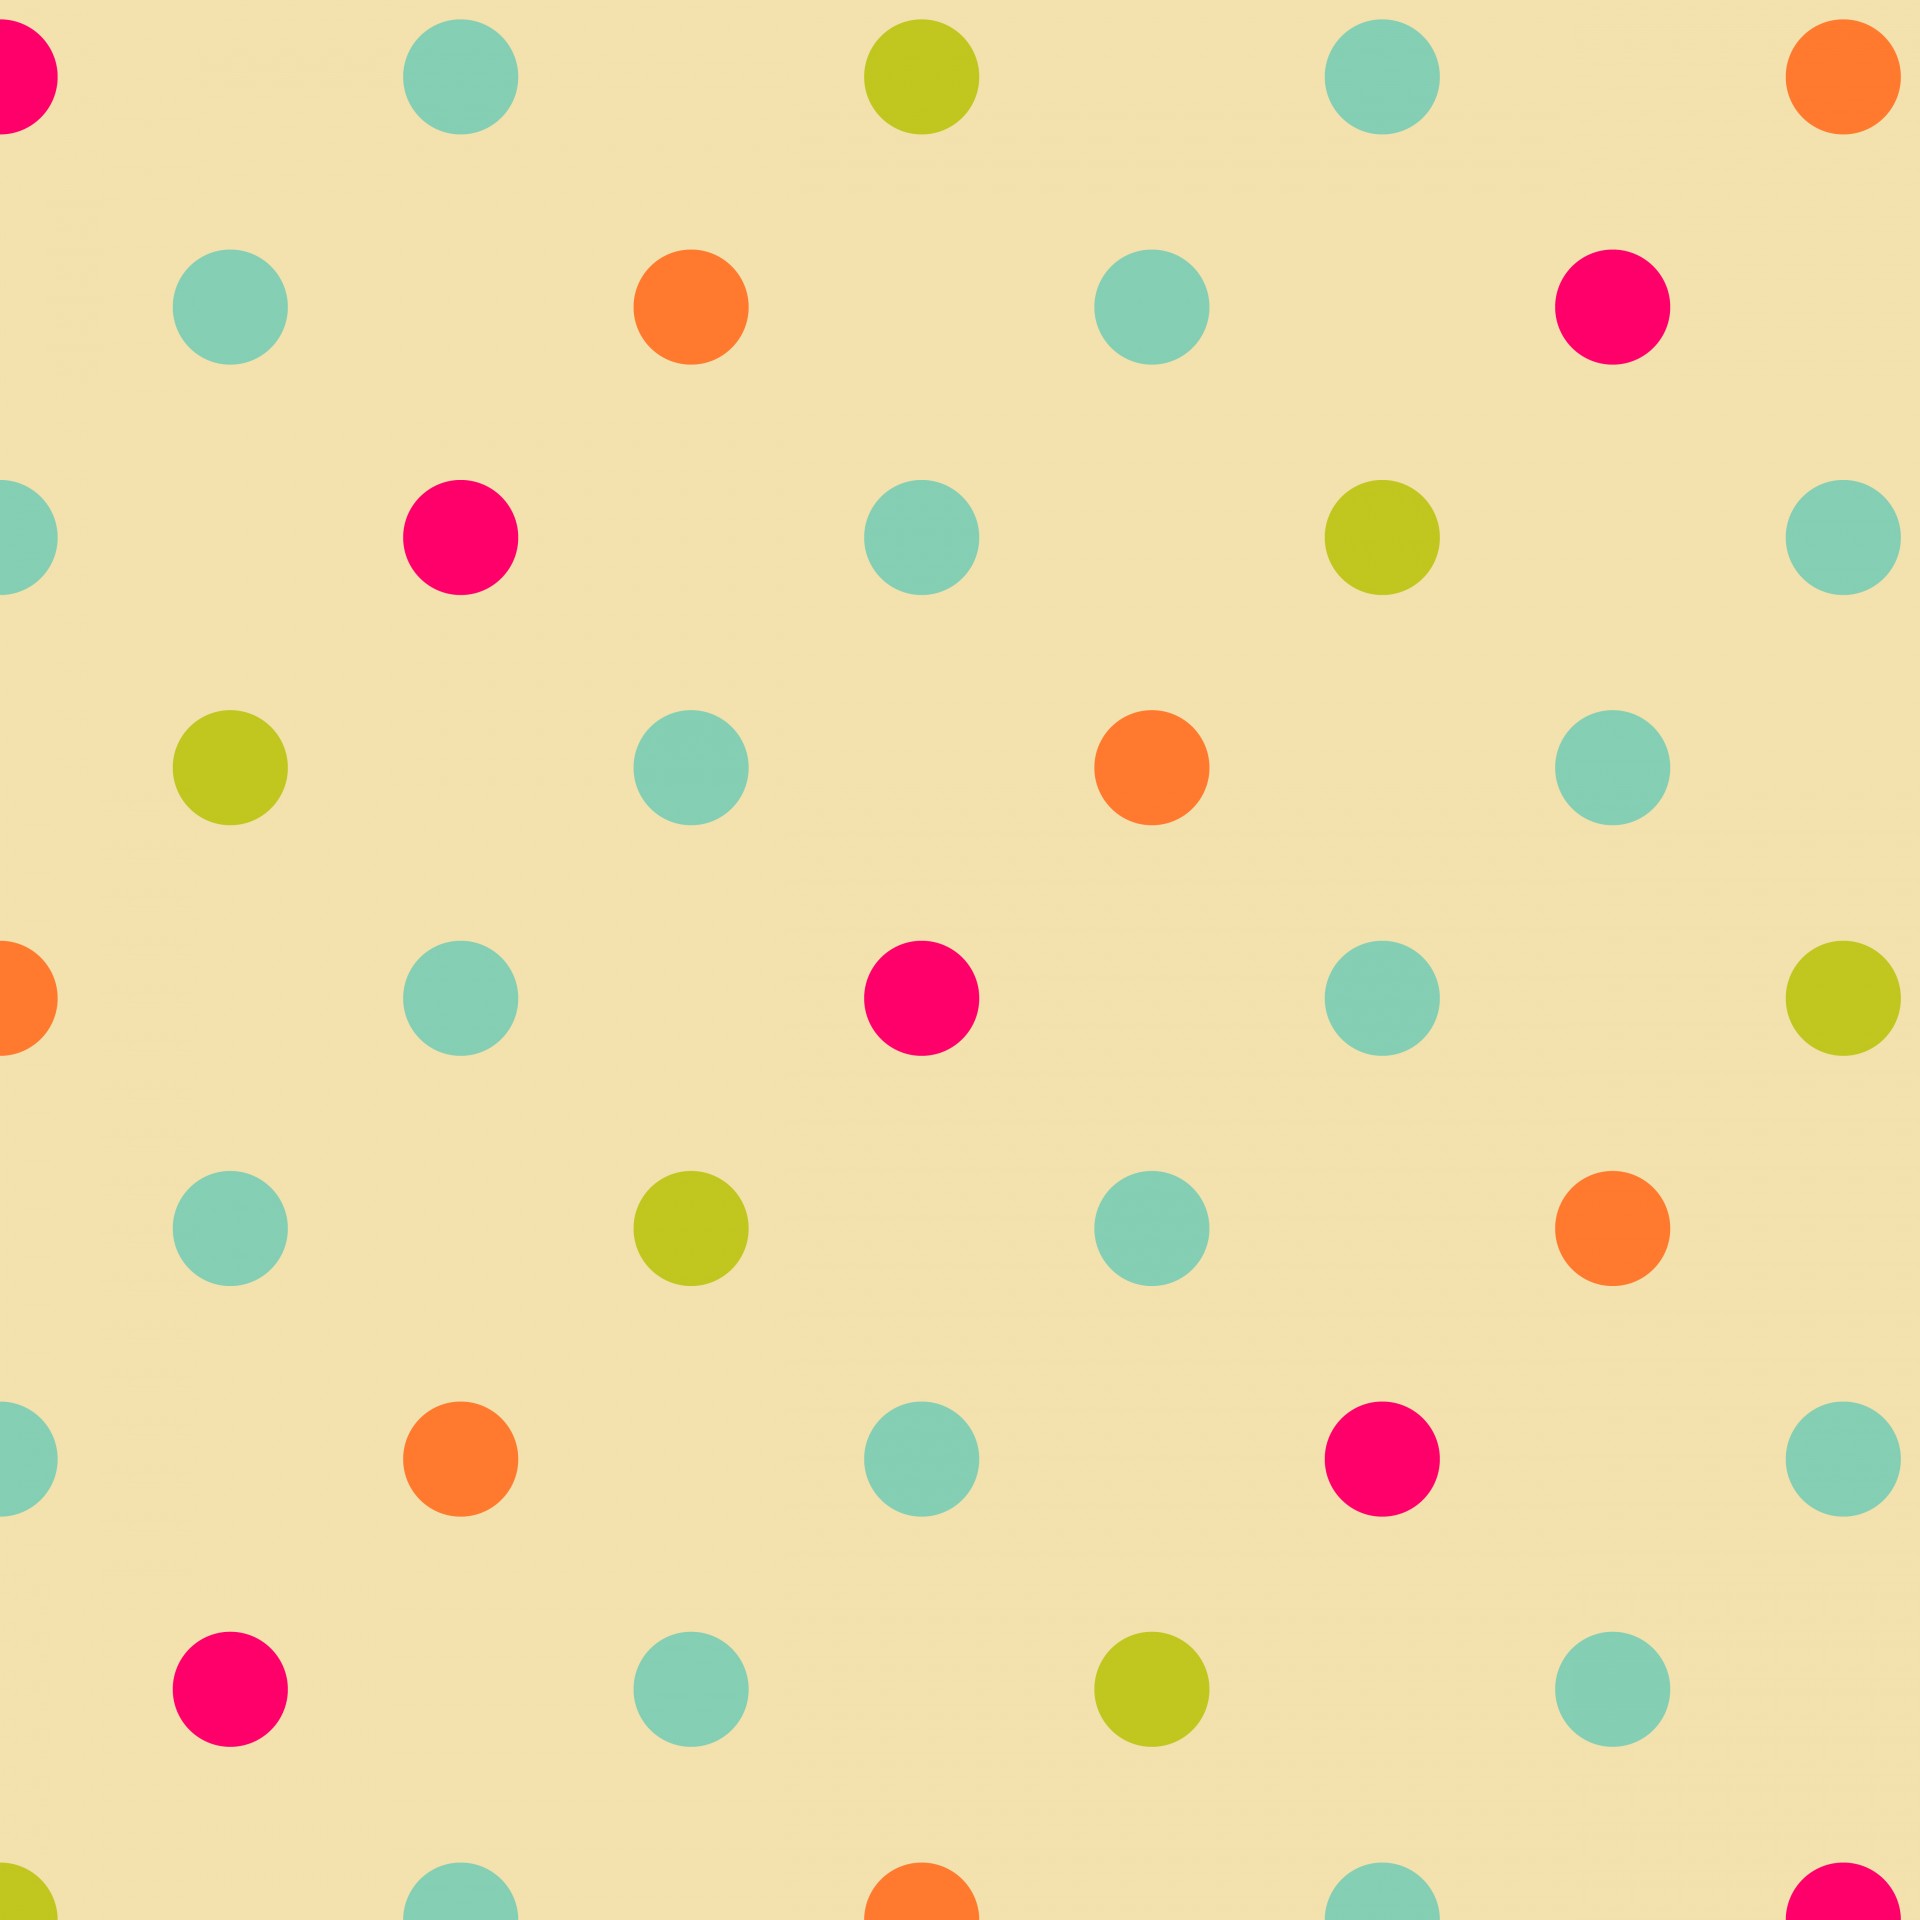 Polka dots,vintage,dots,spots,background - free image from